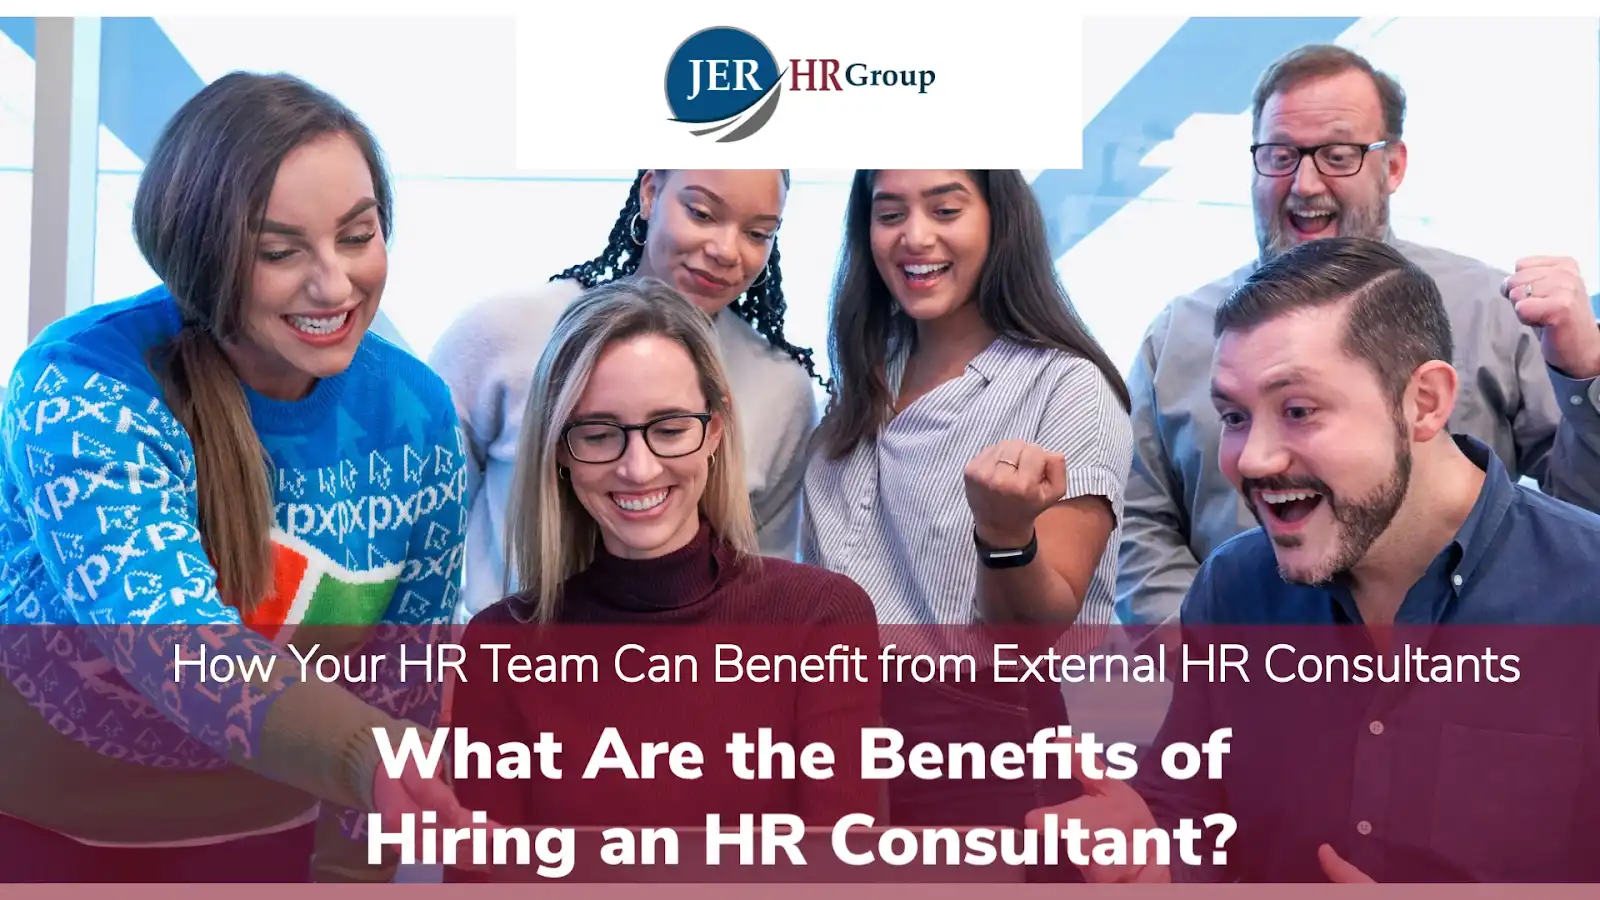 Benefits of Hiring an HR Consultant